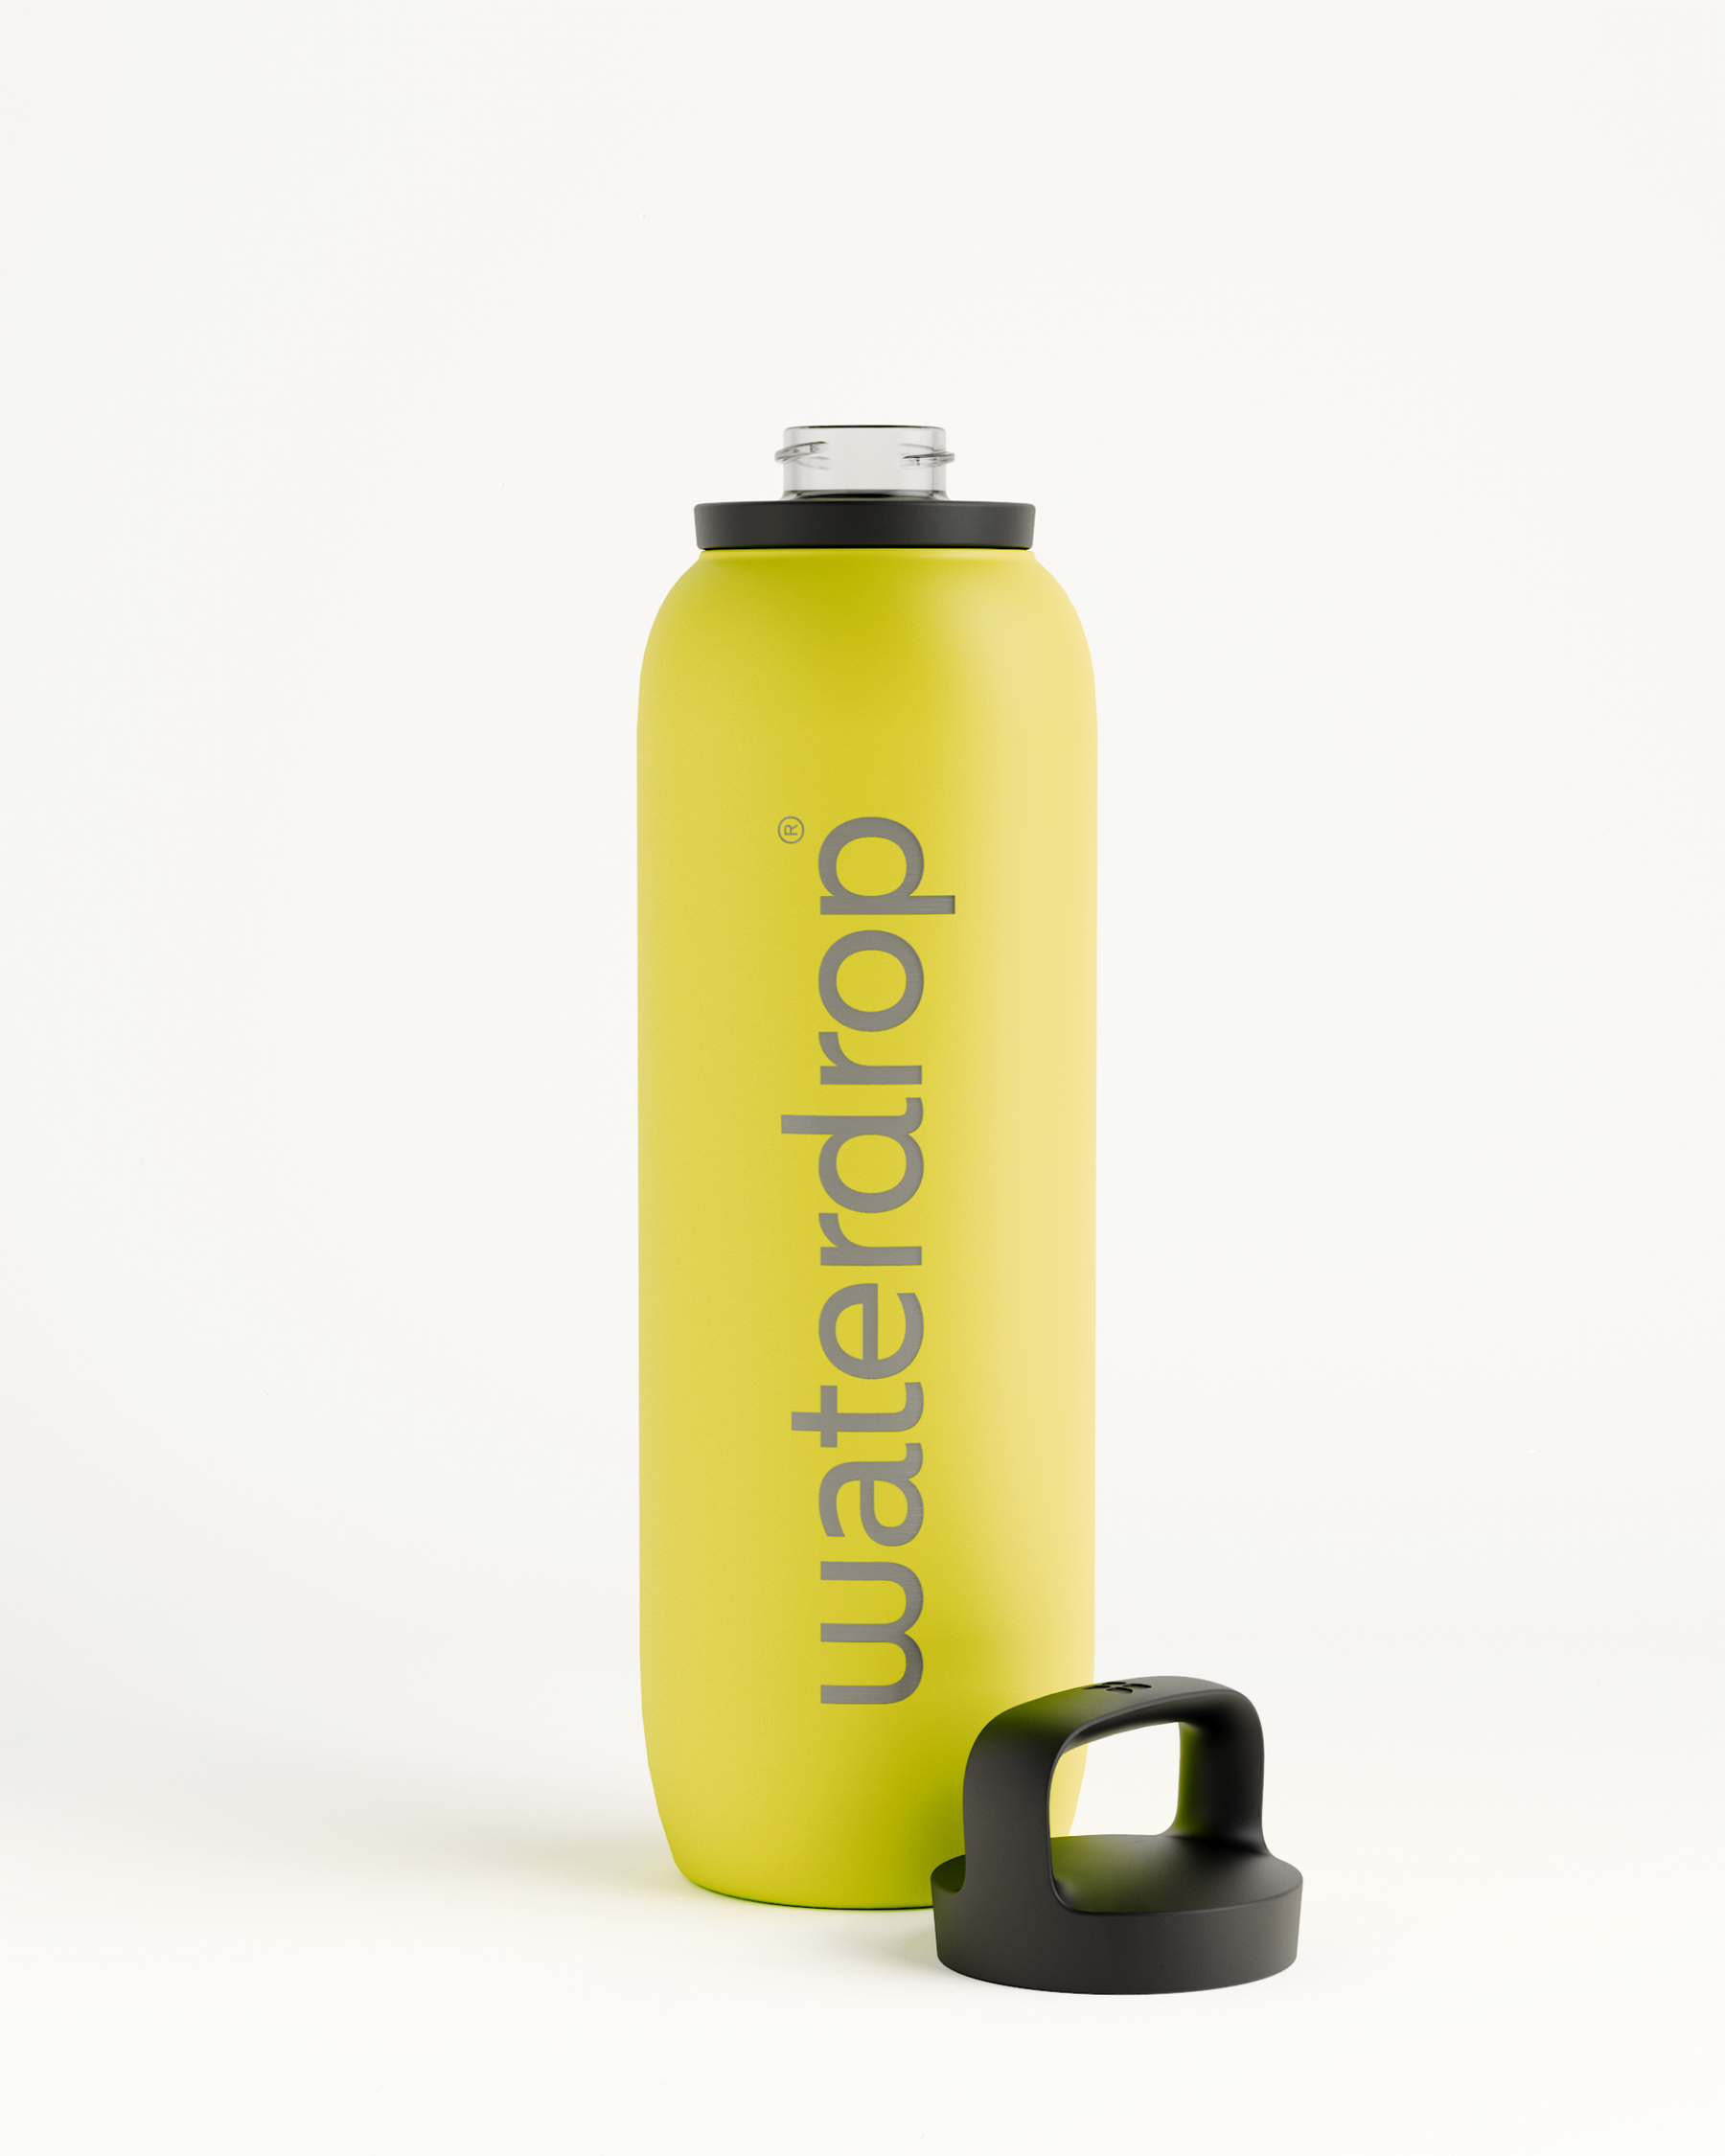 34oz All-Purpose Bottle with mouthpiece: Order now